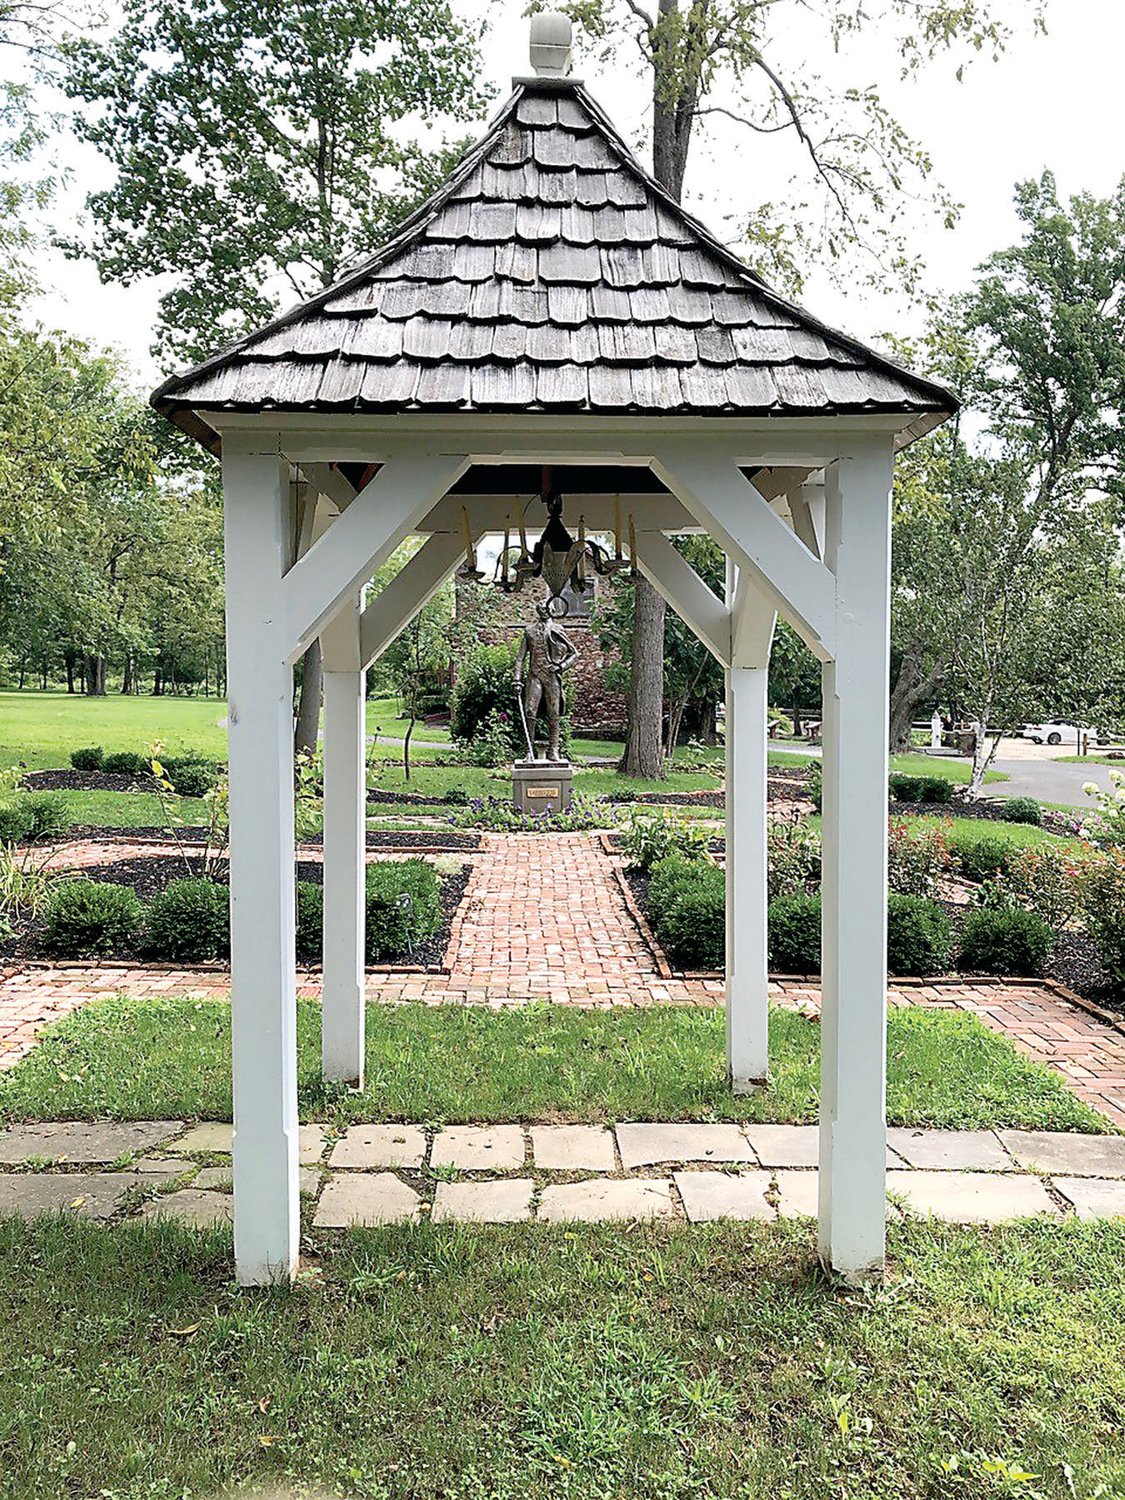 The Colonial Gardens are maintained by Steve Forostiak. The Lafayette statue in the background was donated by Murrie Gayman of the board of directors.